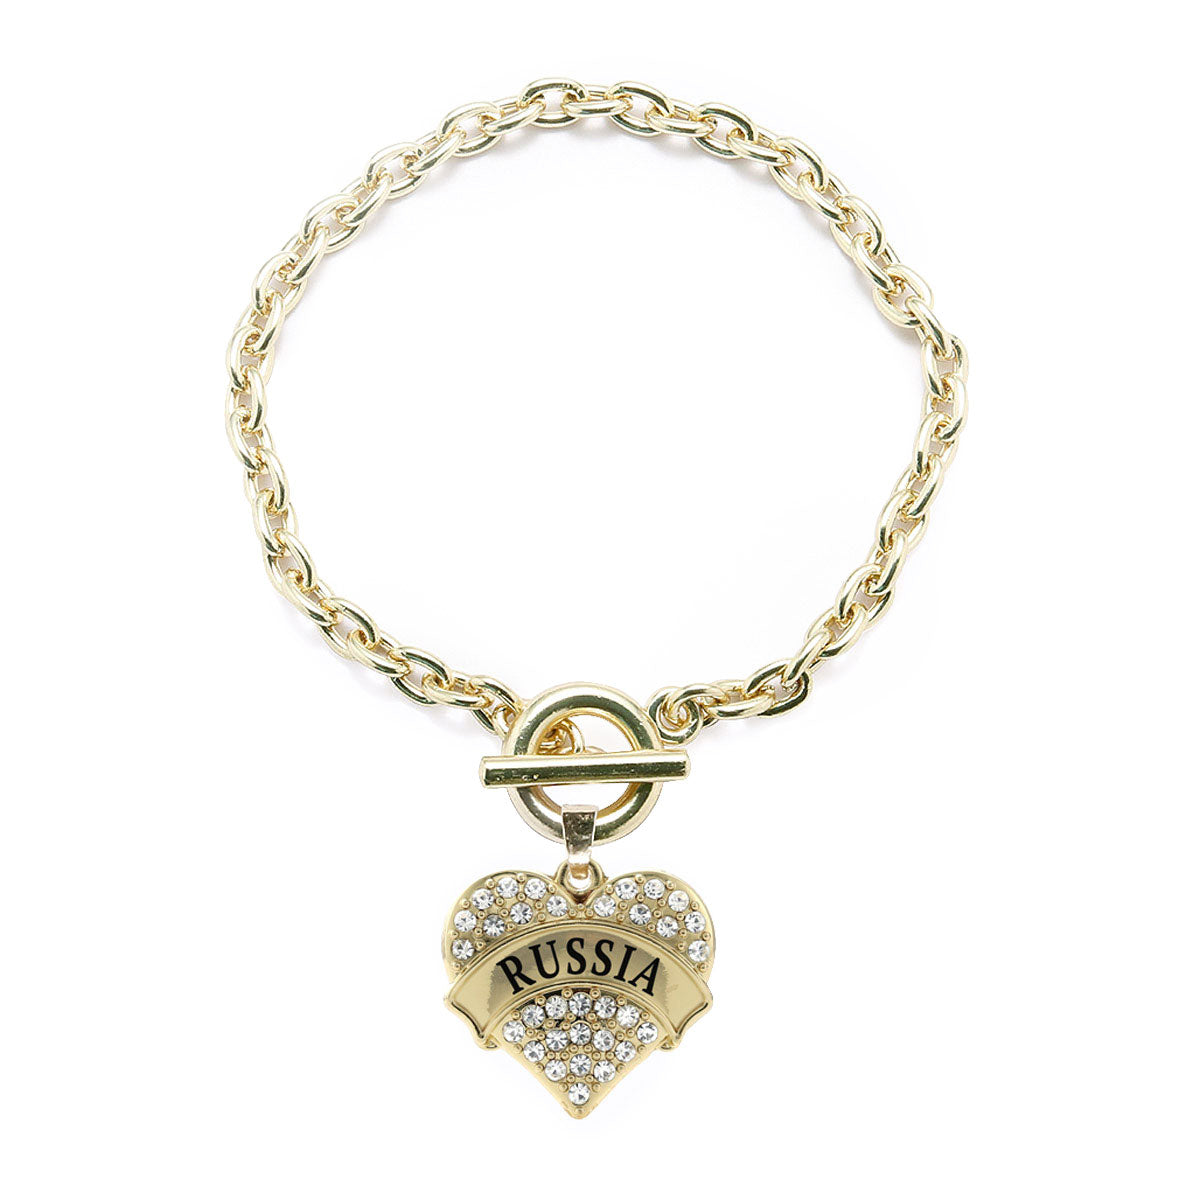 Gold Russia Pave Heart Charm Toggle Bracelet